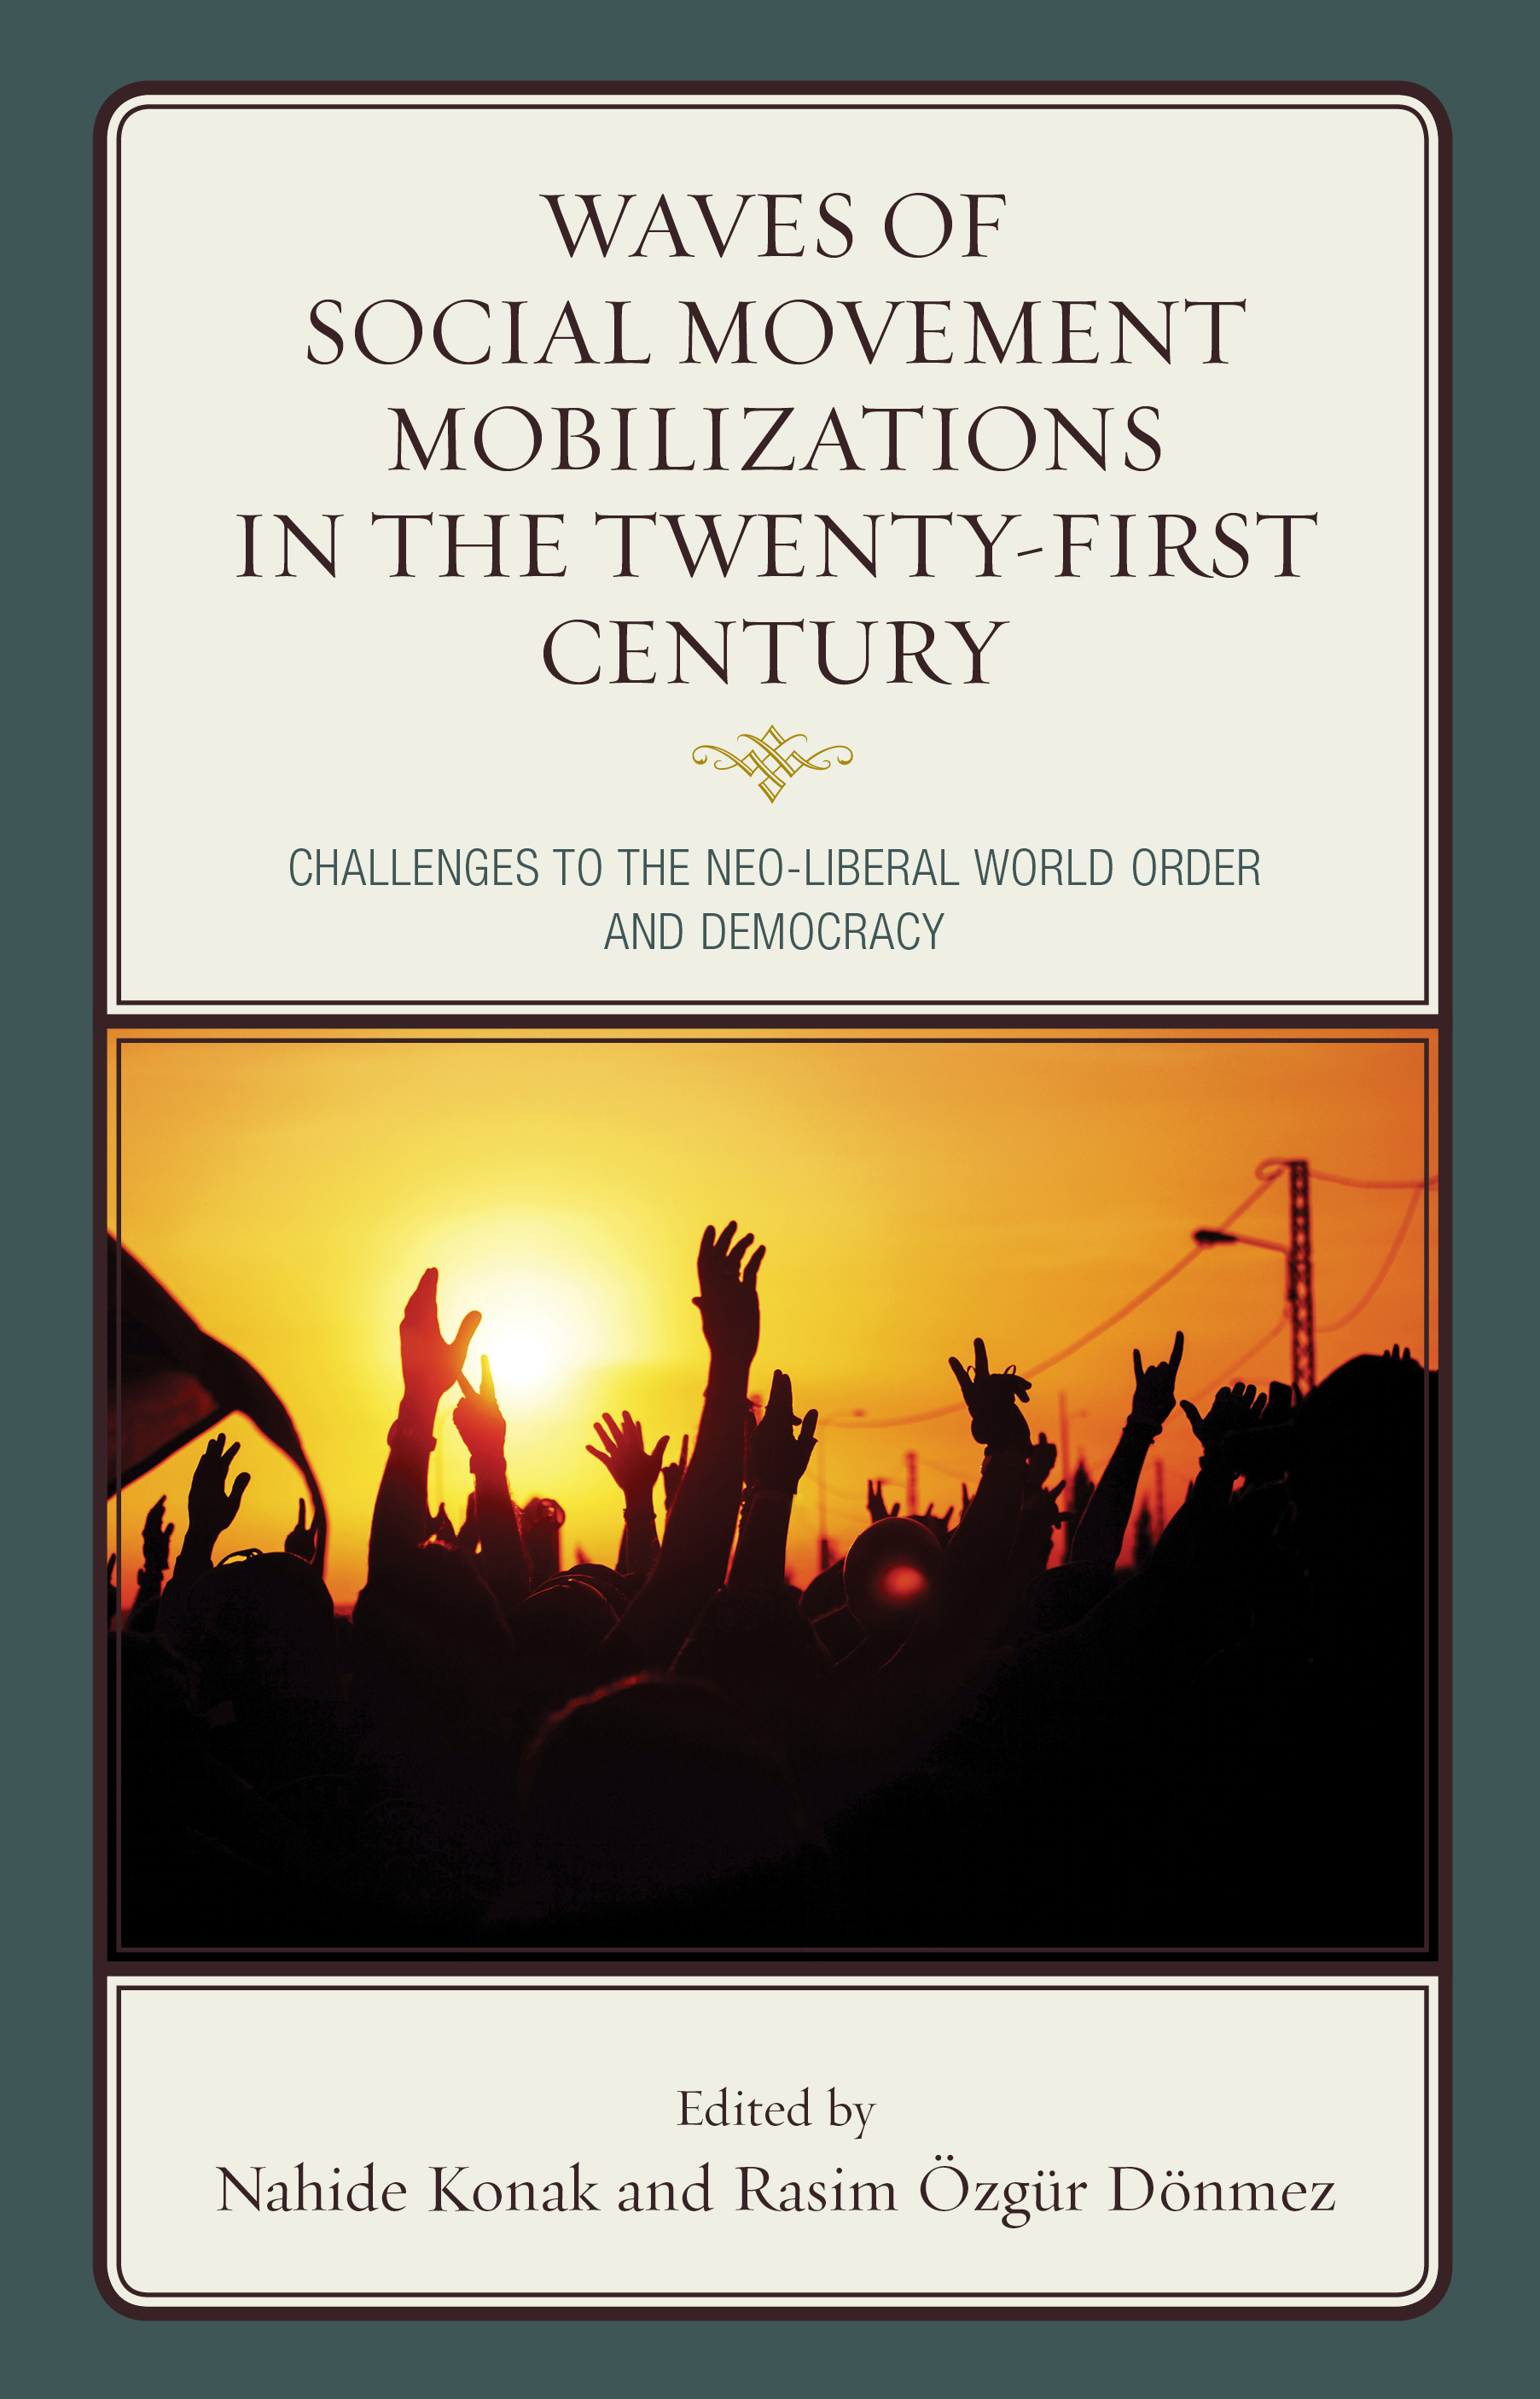 Waves of Social Movement Mobilizations in the Twenty-First Century: Challenges to the Neo-Liberal World Order and Democracy